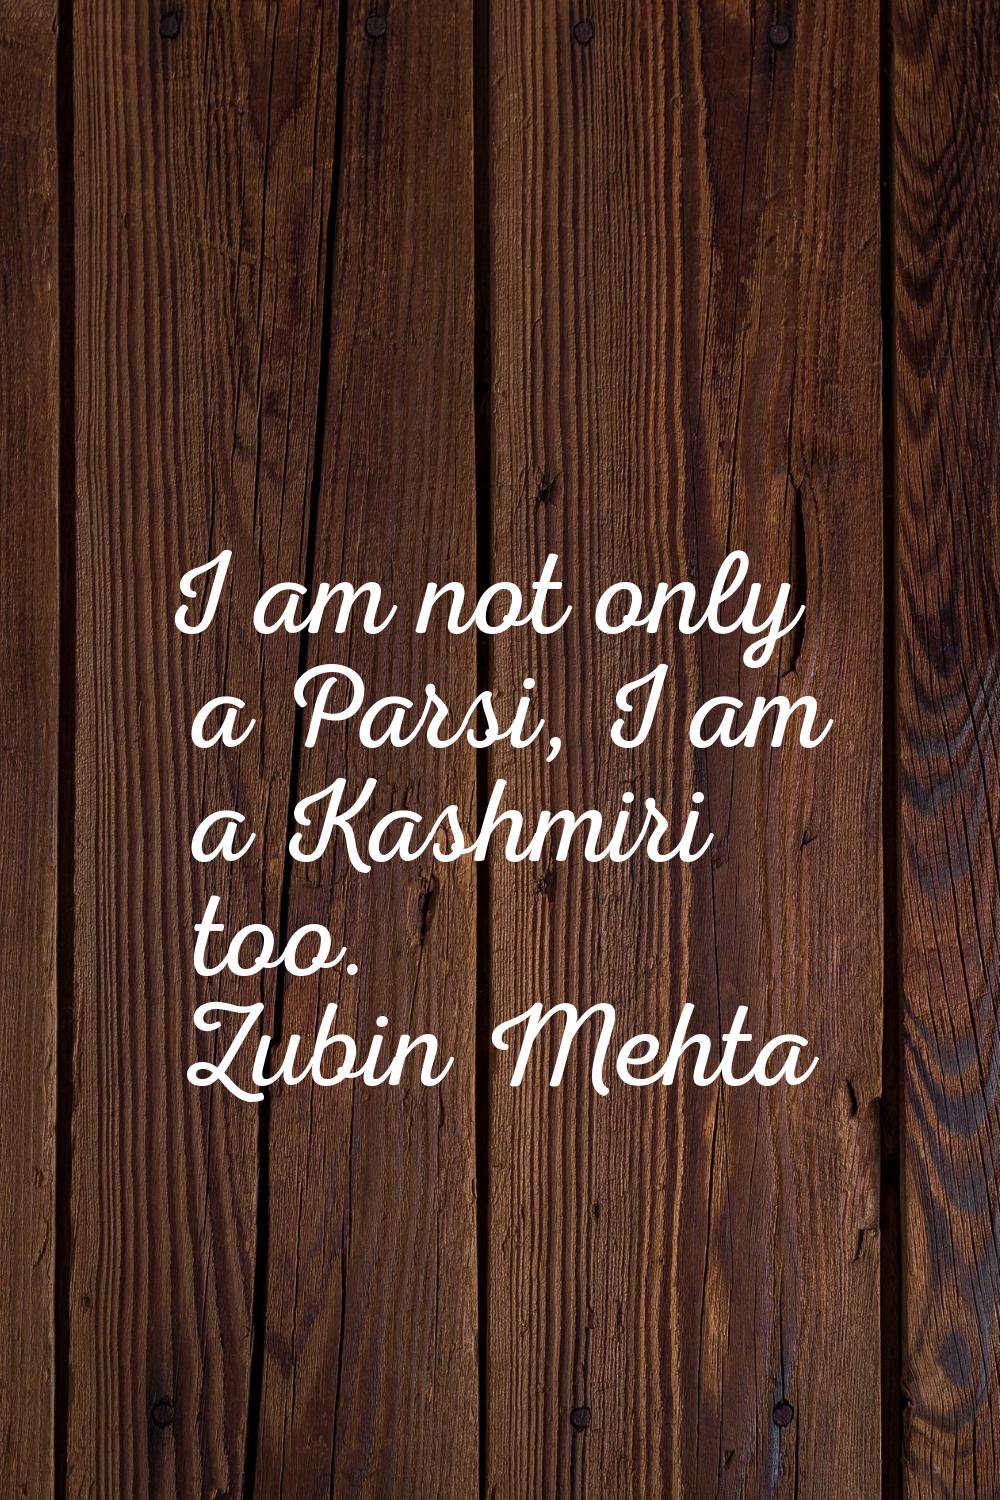 I am not only a Parsi, I am a Kashmiri too.